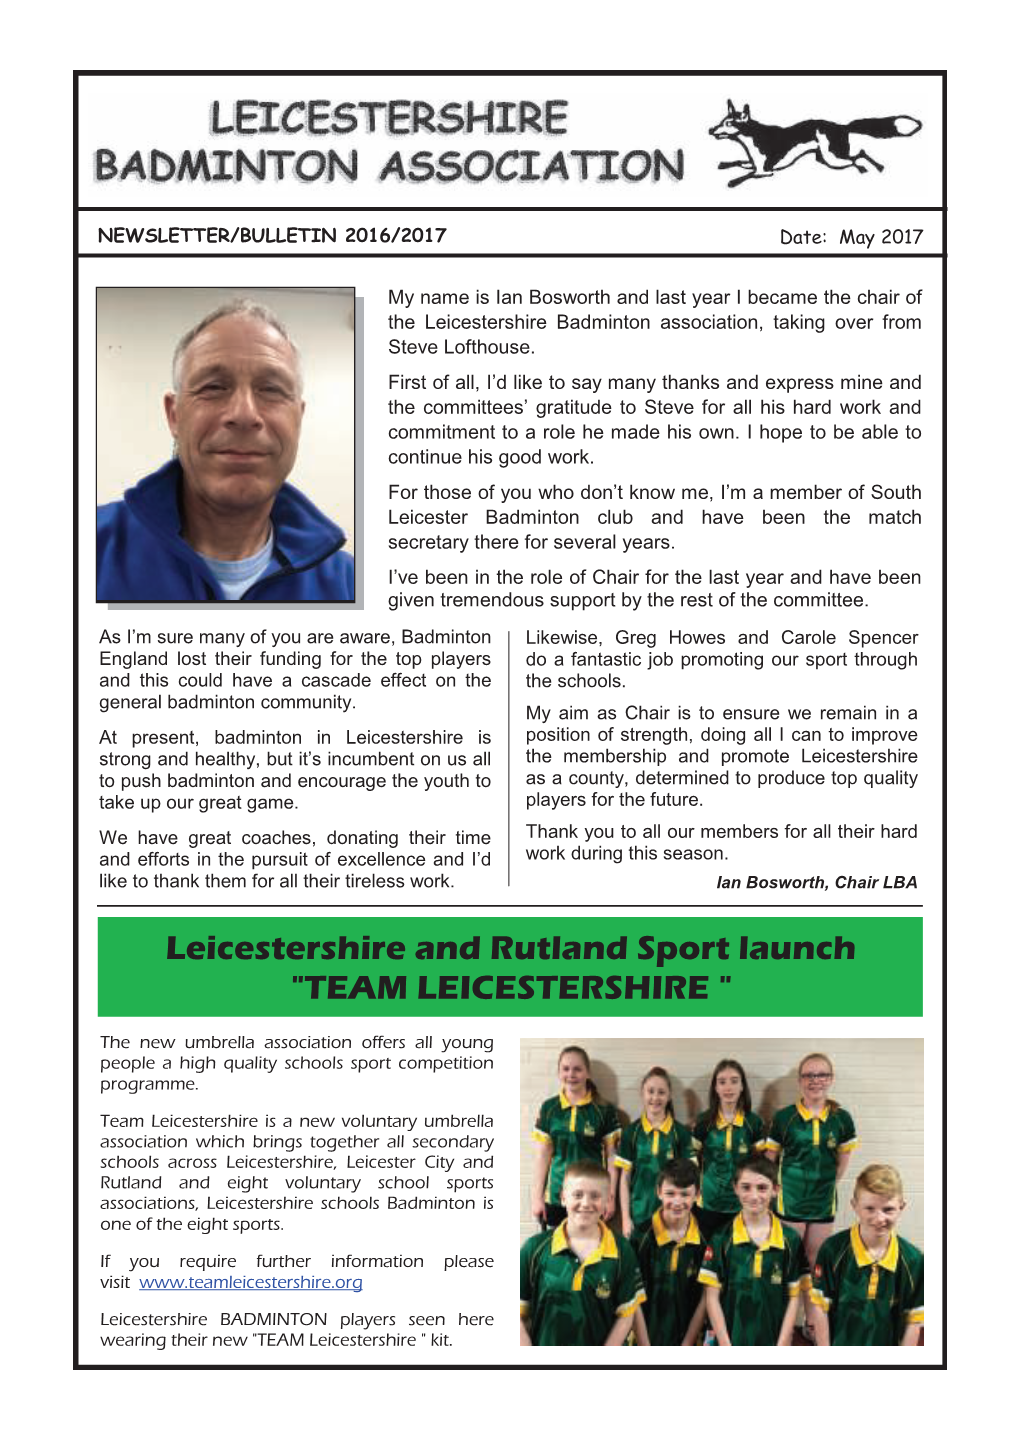 Leicestershire and Rutland Sport Launch "TEAM LEICESTERSHIRE "